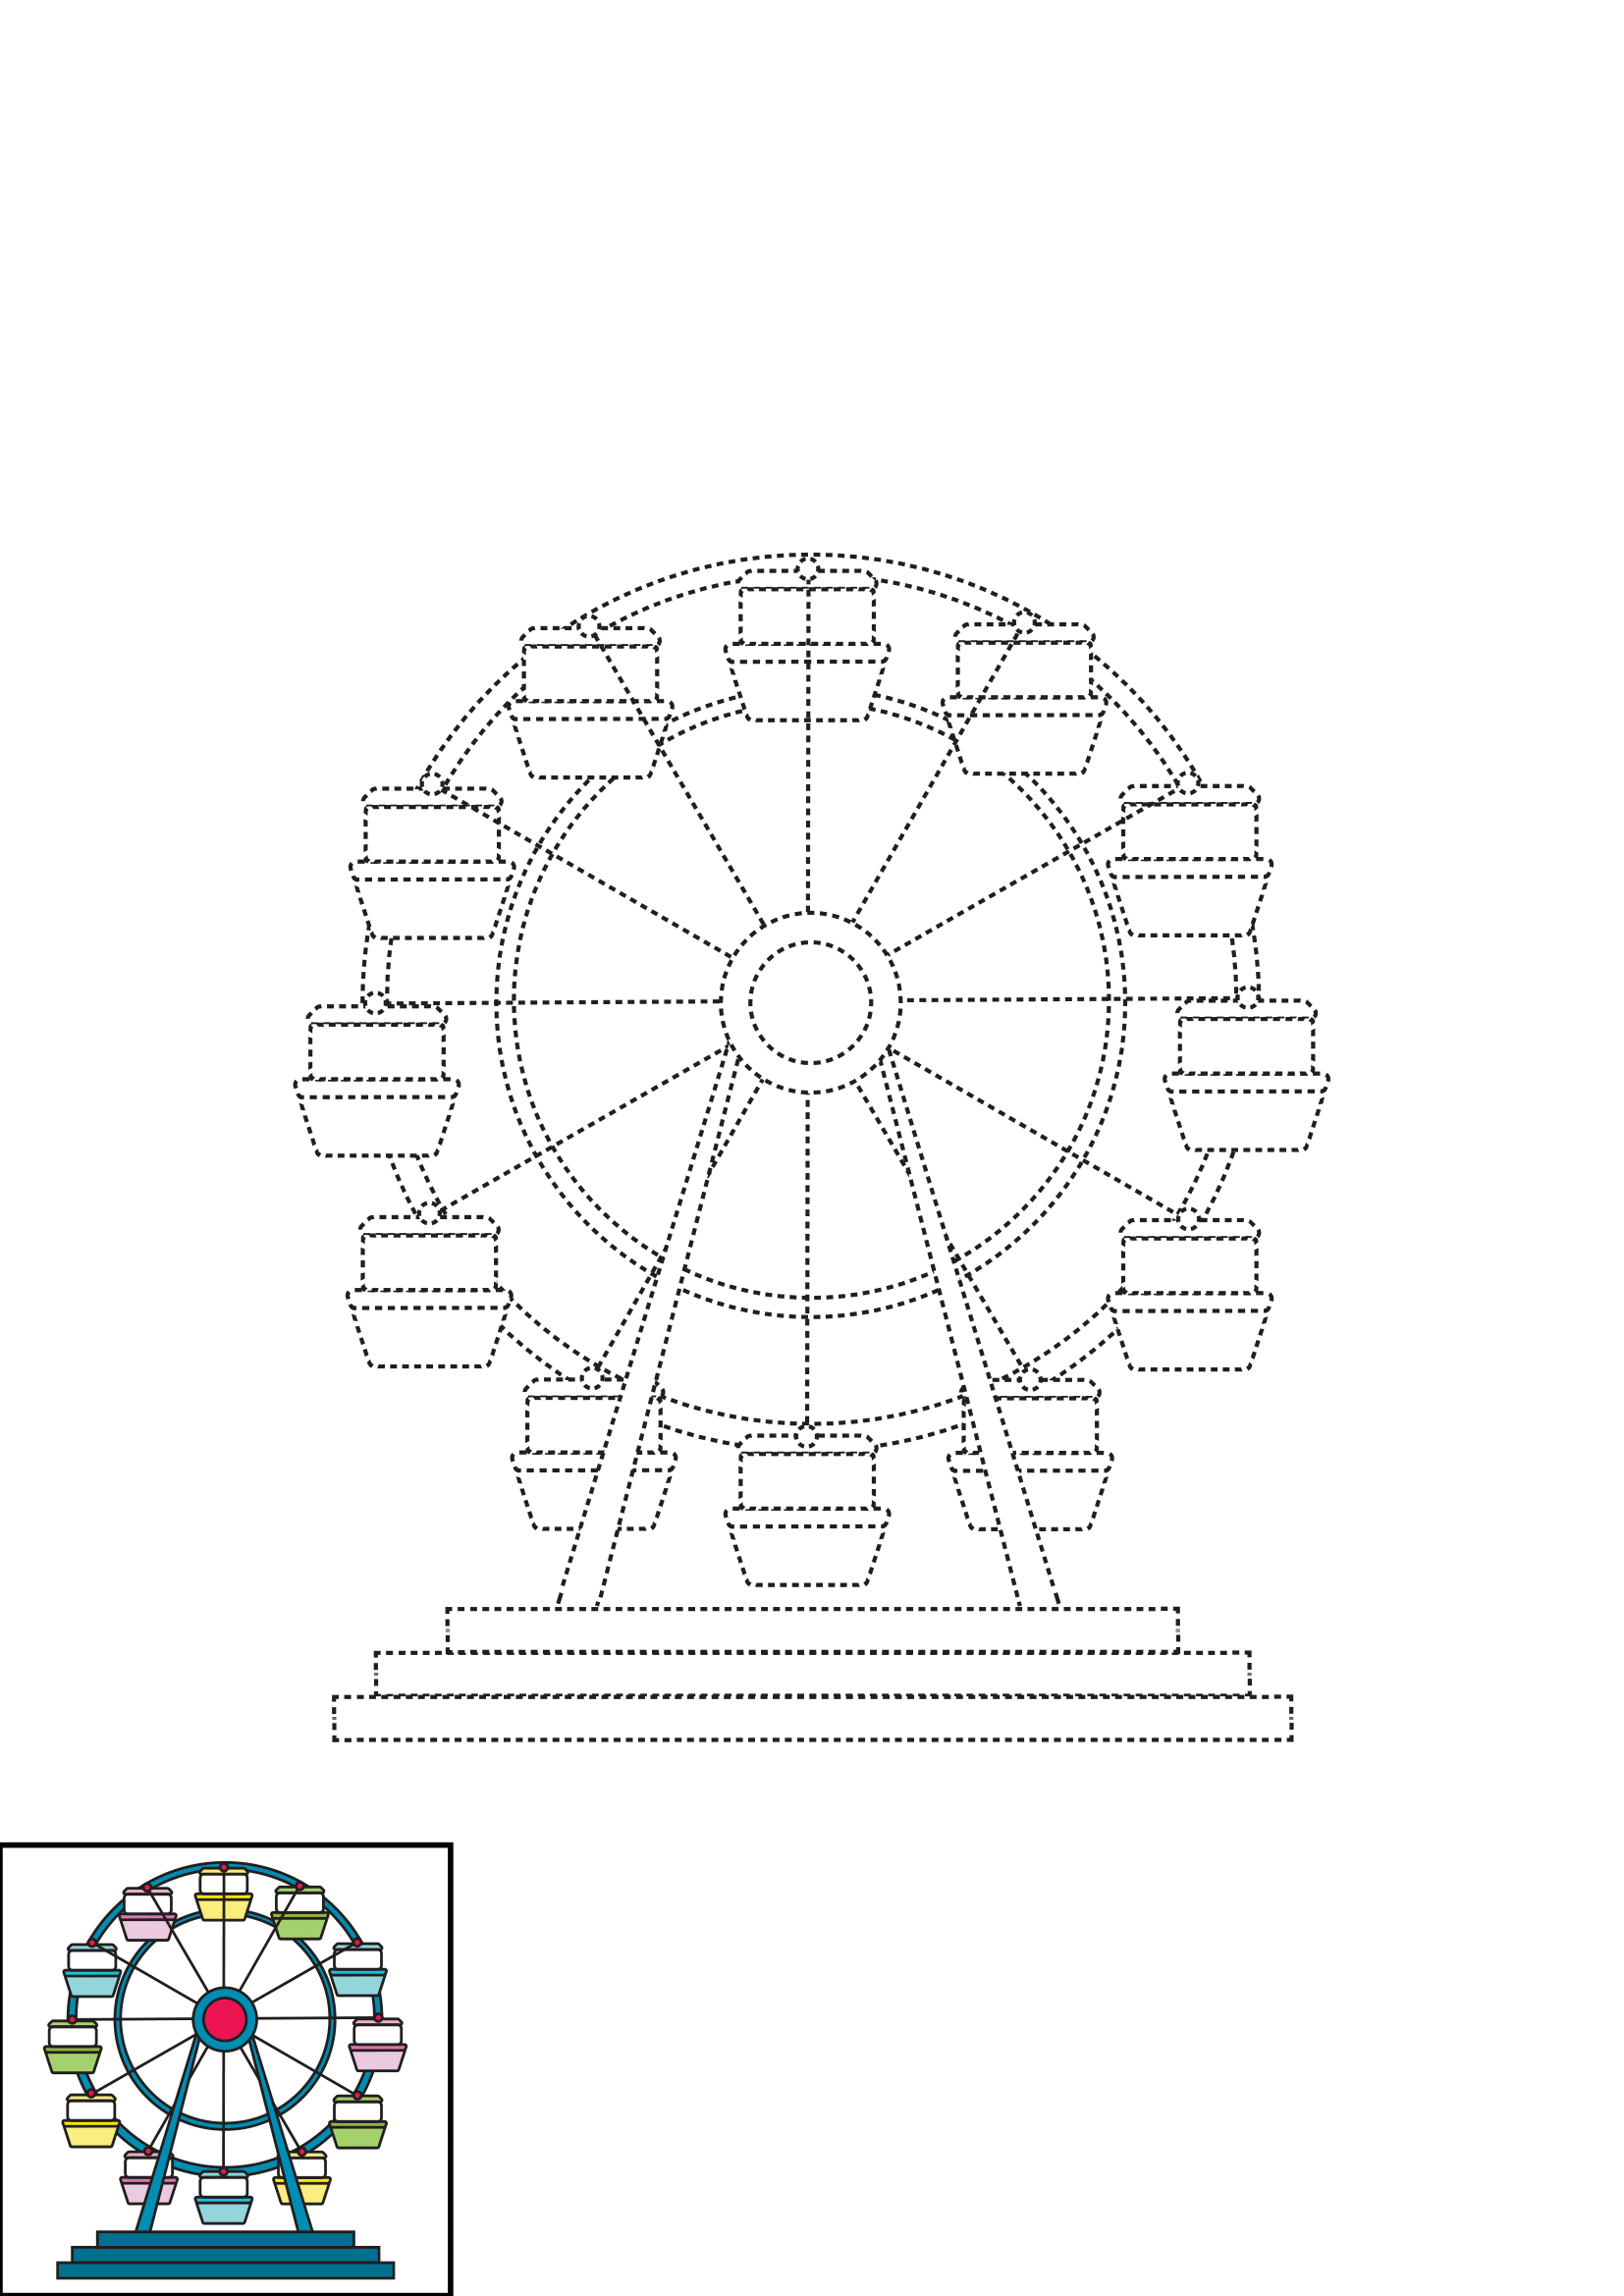 How to Draw A Ferris Wheel Step by Step Printable Dotted